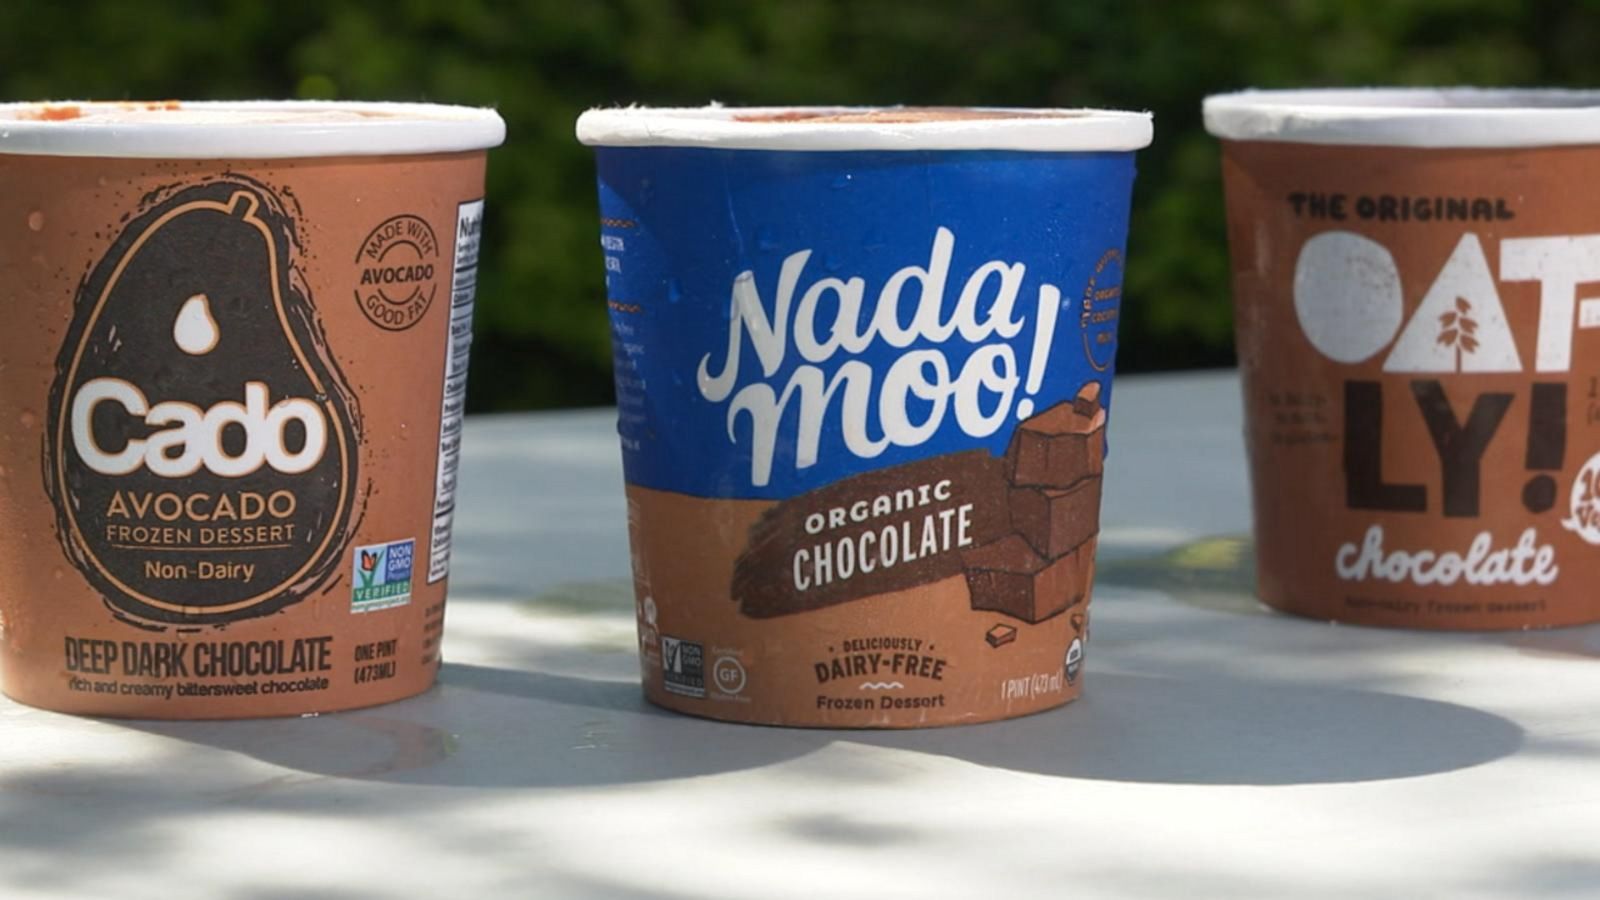 Every major brand of ice cream available in N.J., ranked from